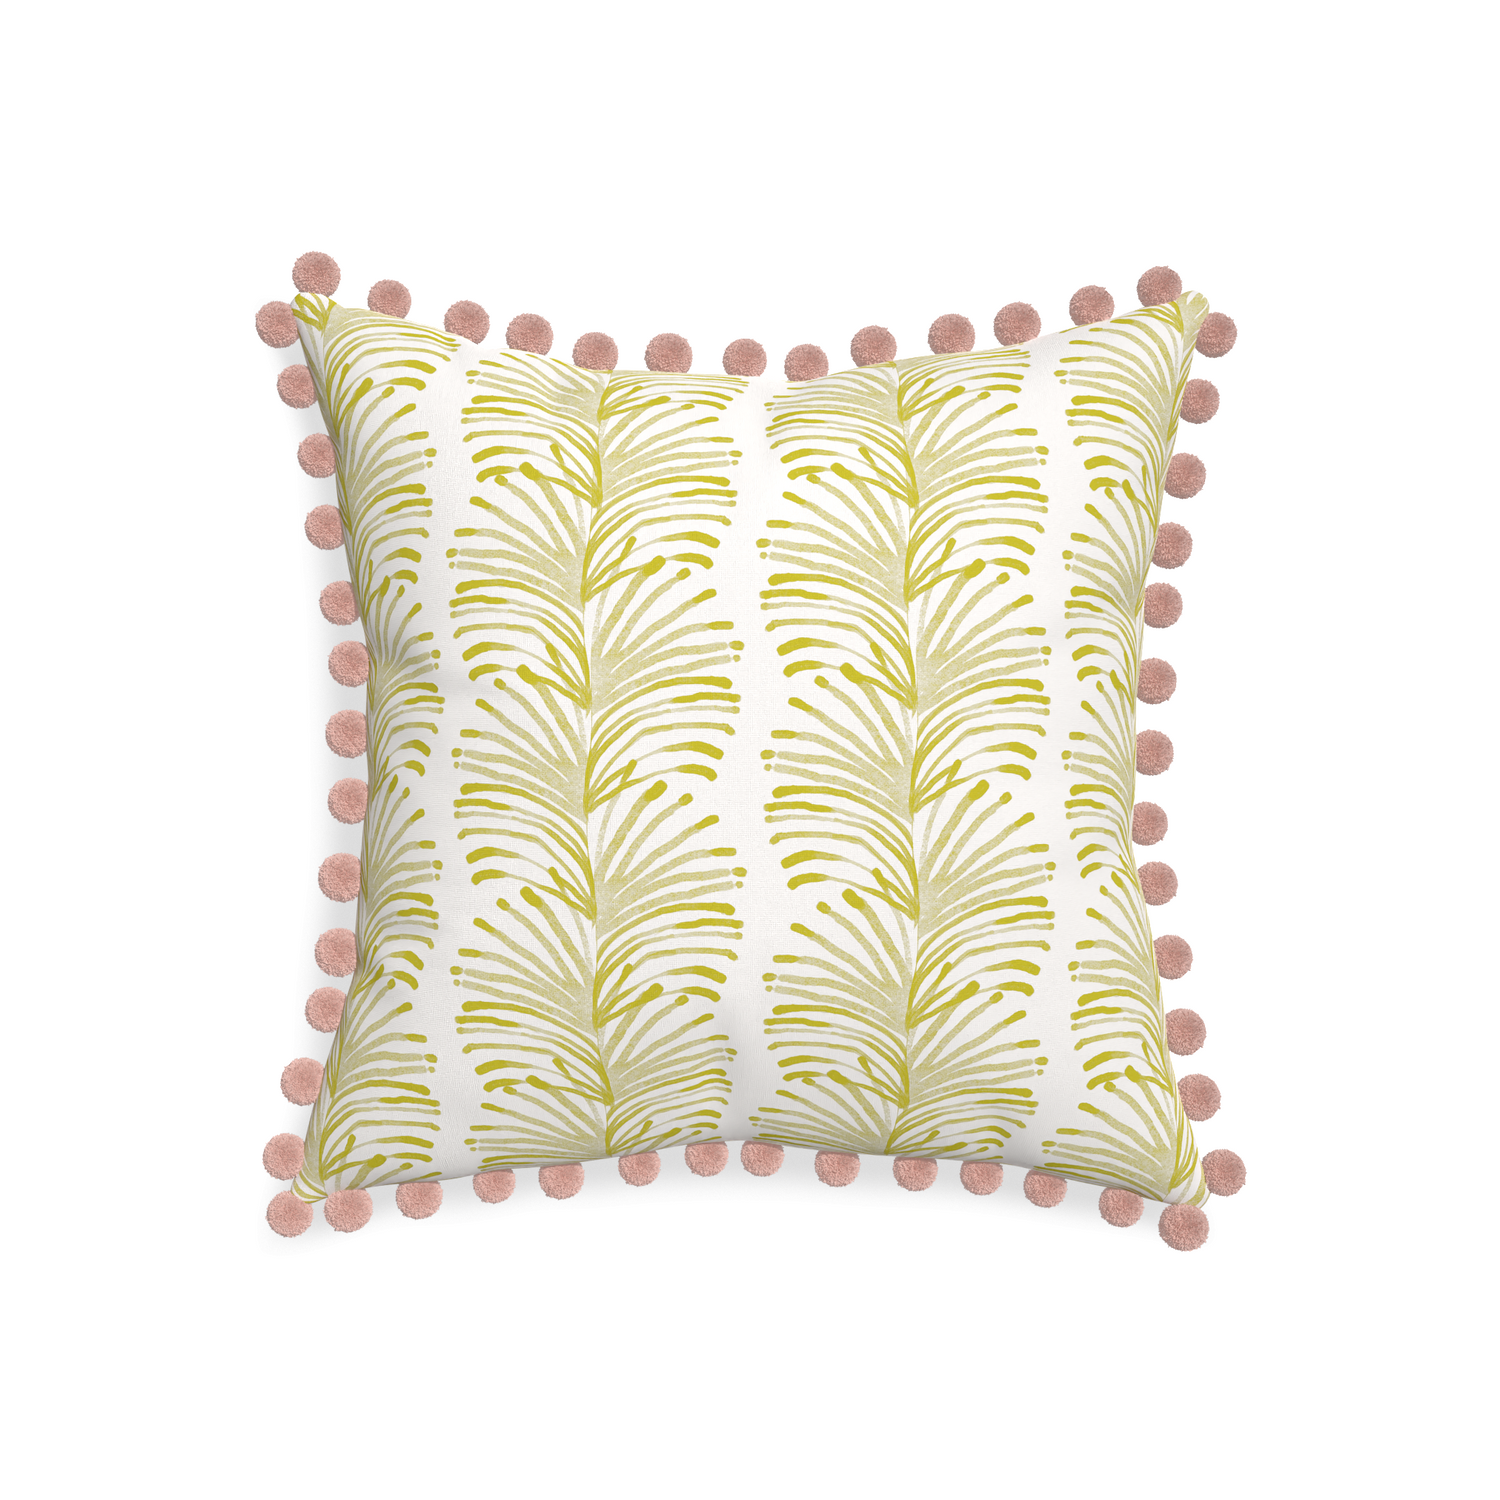 20-square emma chartreuse custom yellow stripe chartreusepillow with rose pom pom on white background